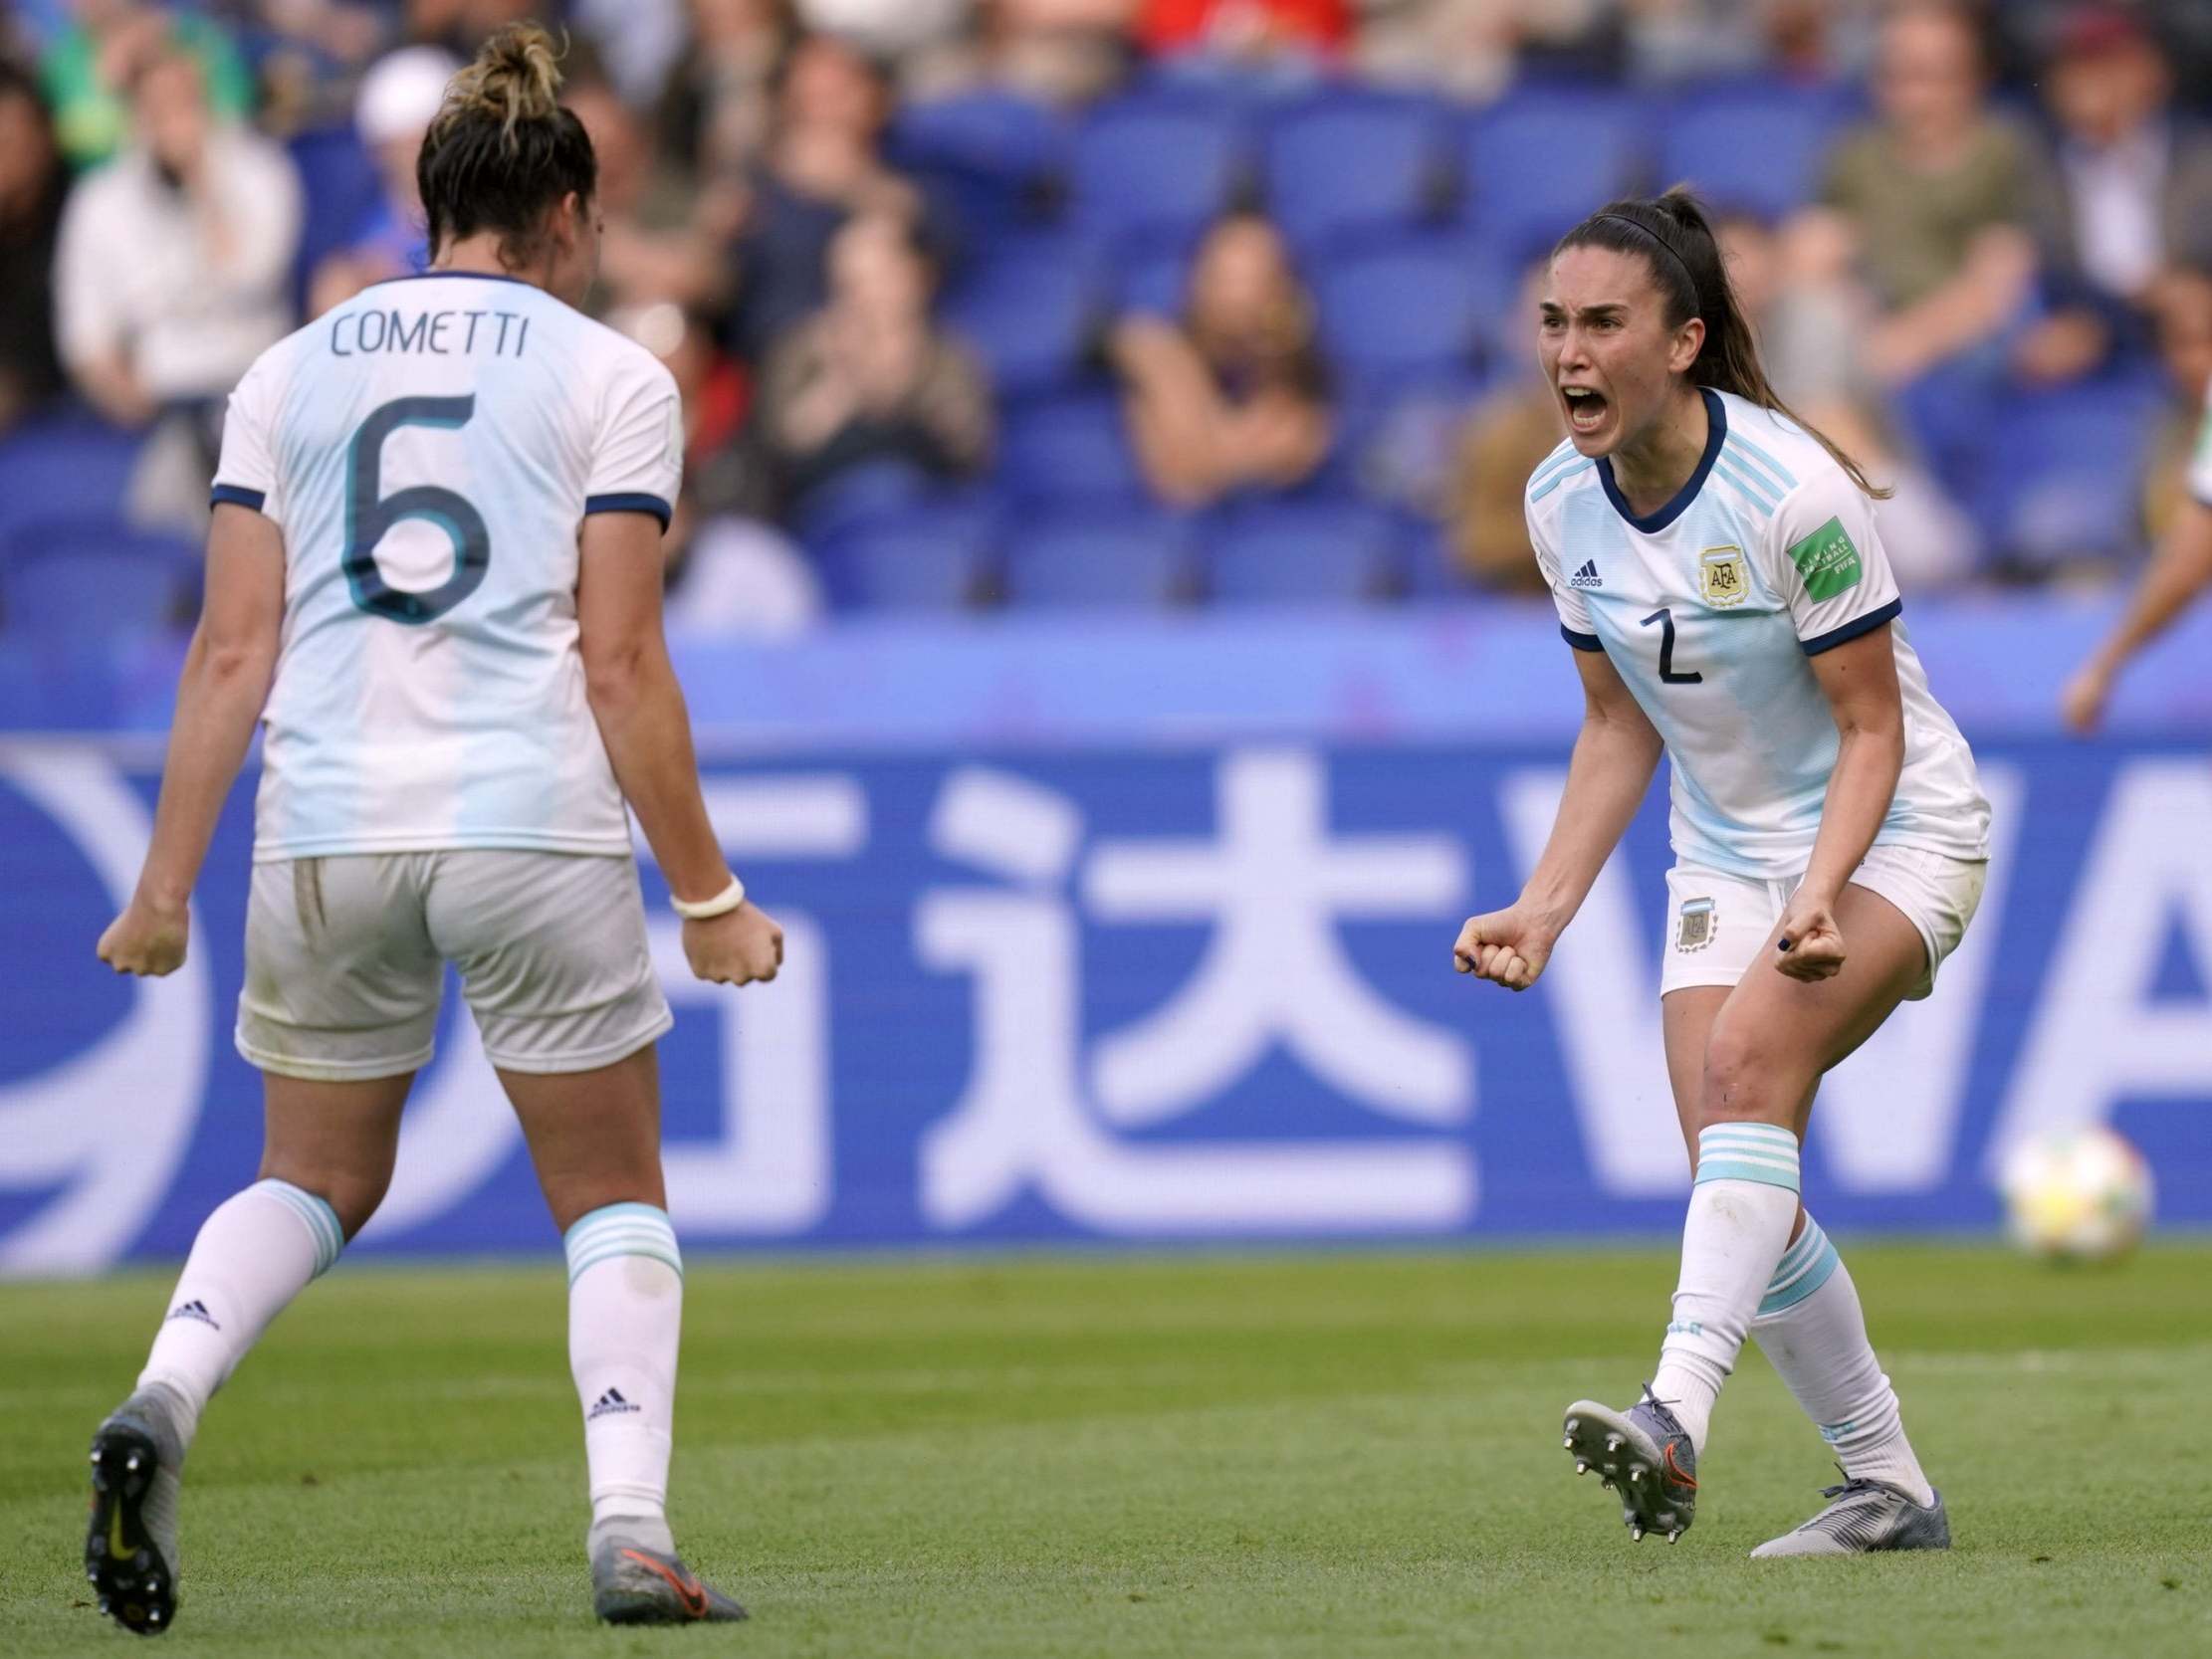 Women's World Cup 2019: Argentina earn first ever point as big-hitters Japan falter